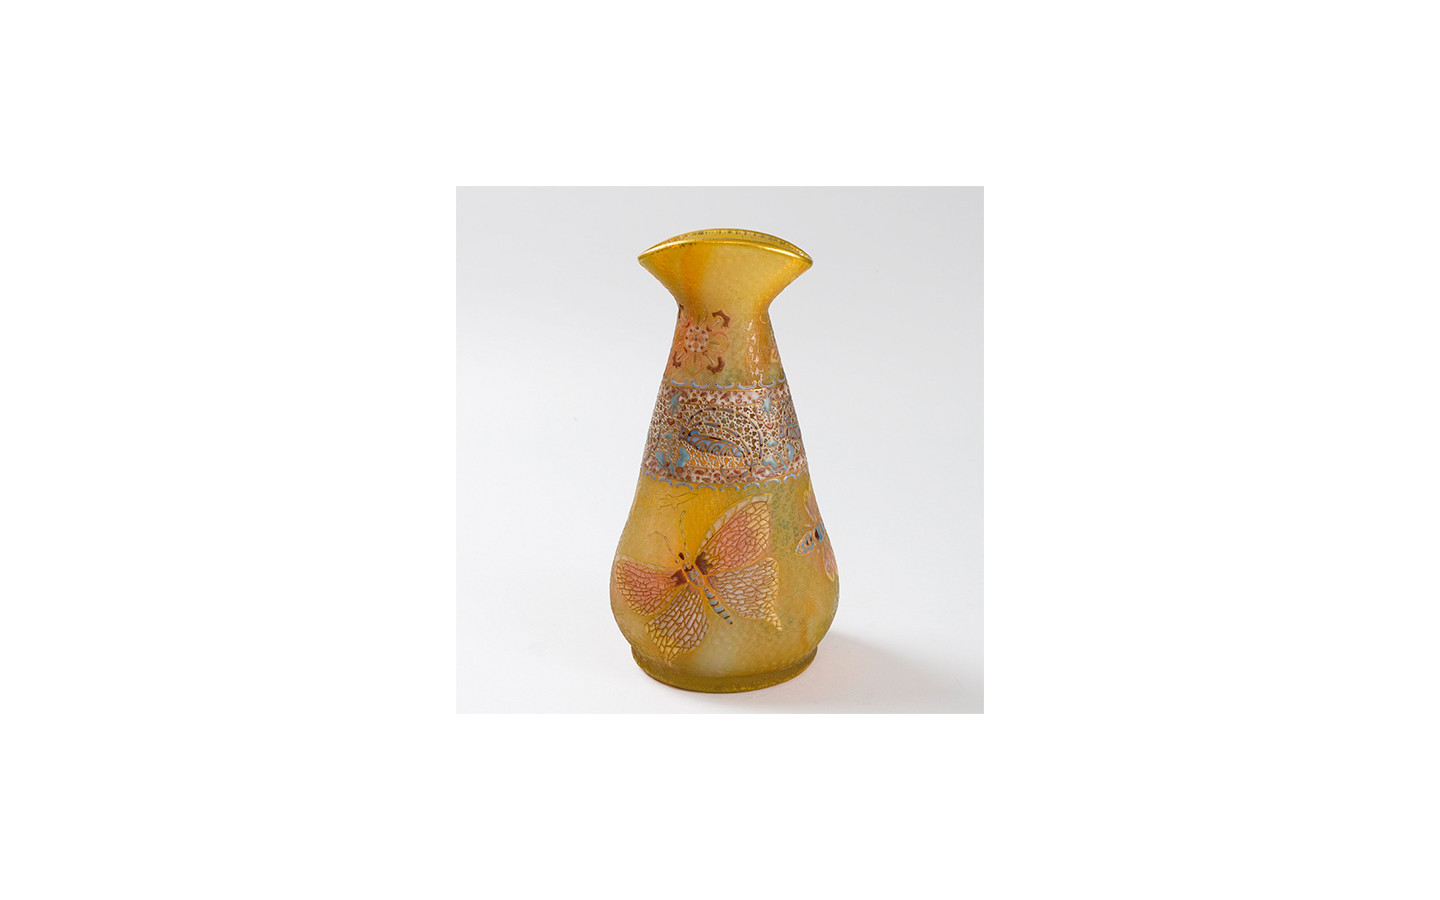 15 Fabulous Daum Nancy Vase for Sale 2024 free download daum nancy vase for sale of 4 x awesome lego medium stone gray glass for window x x with 4 x x inside beautiful daum nancy french art nouveau papillonset fleurons vase enameled and glass x h